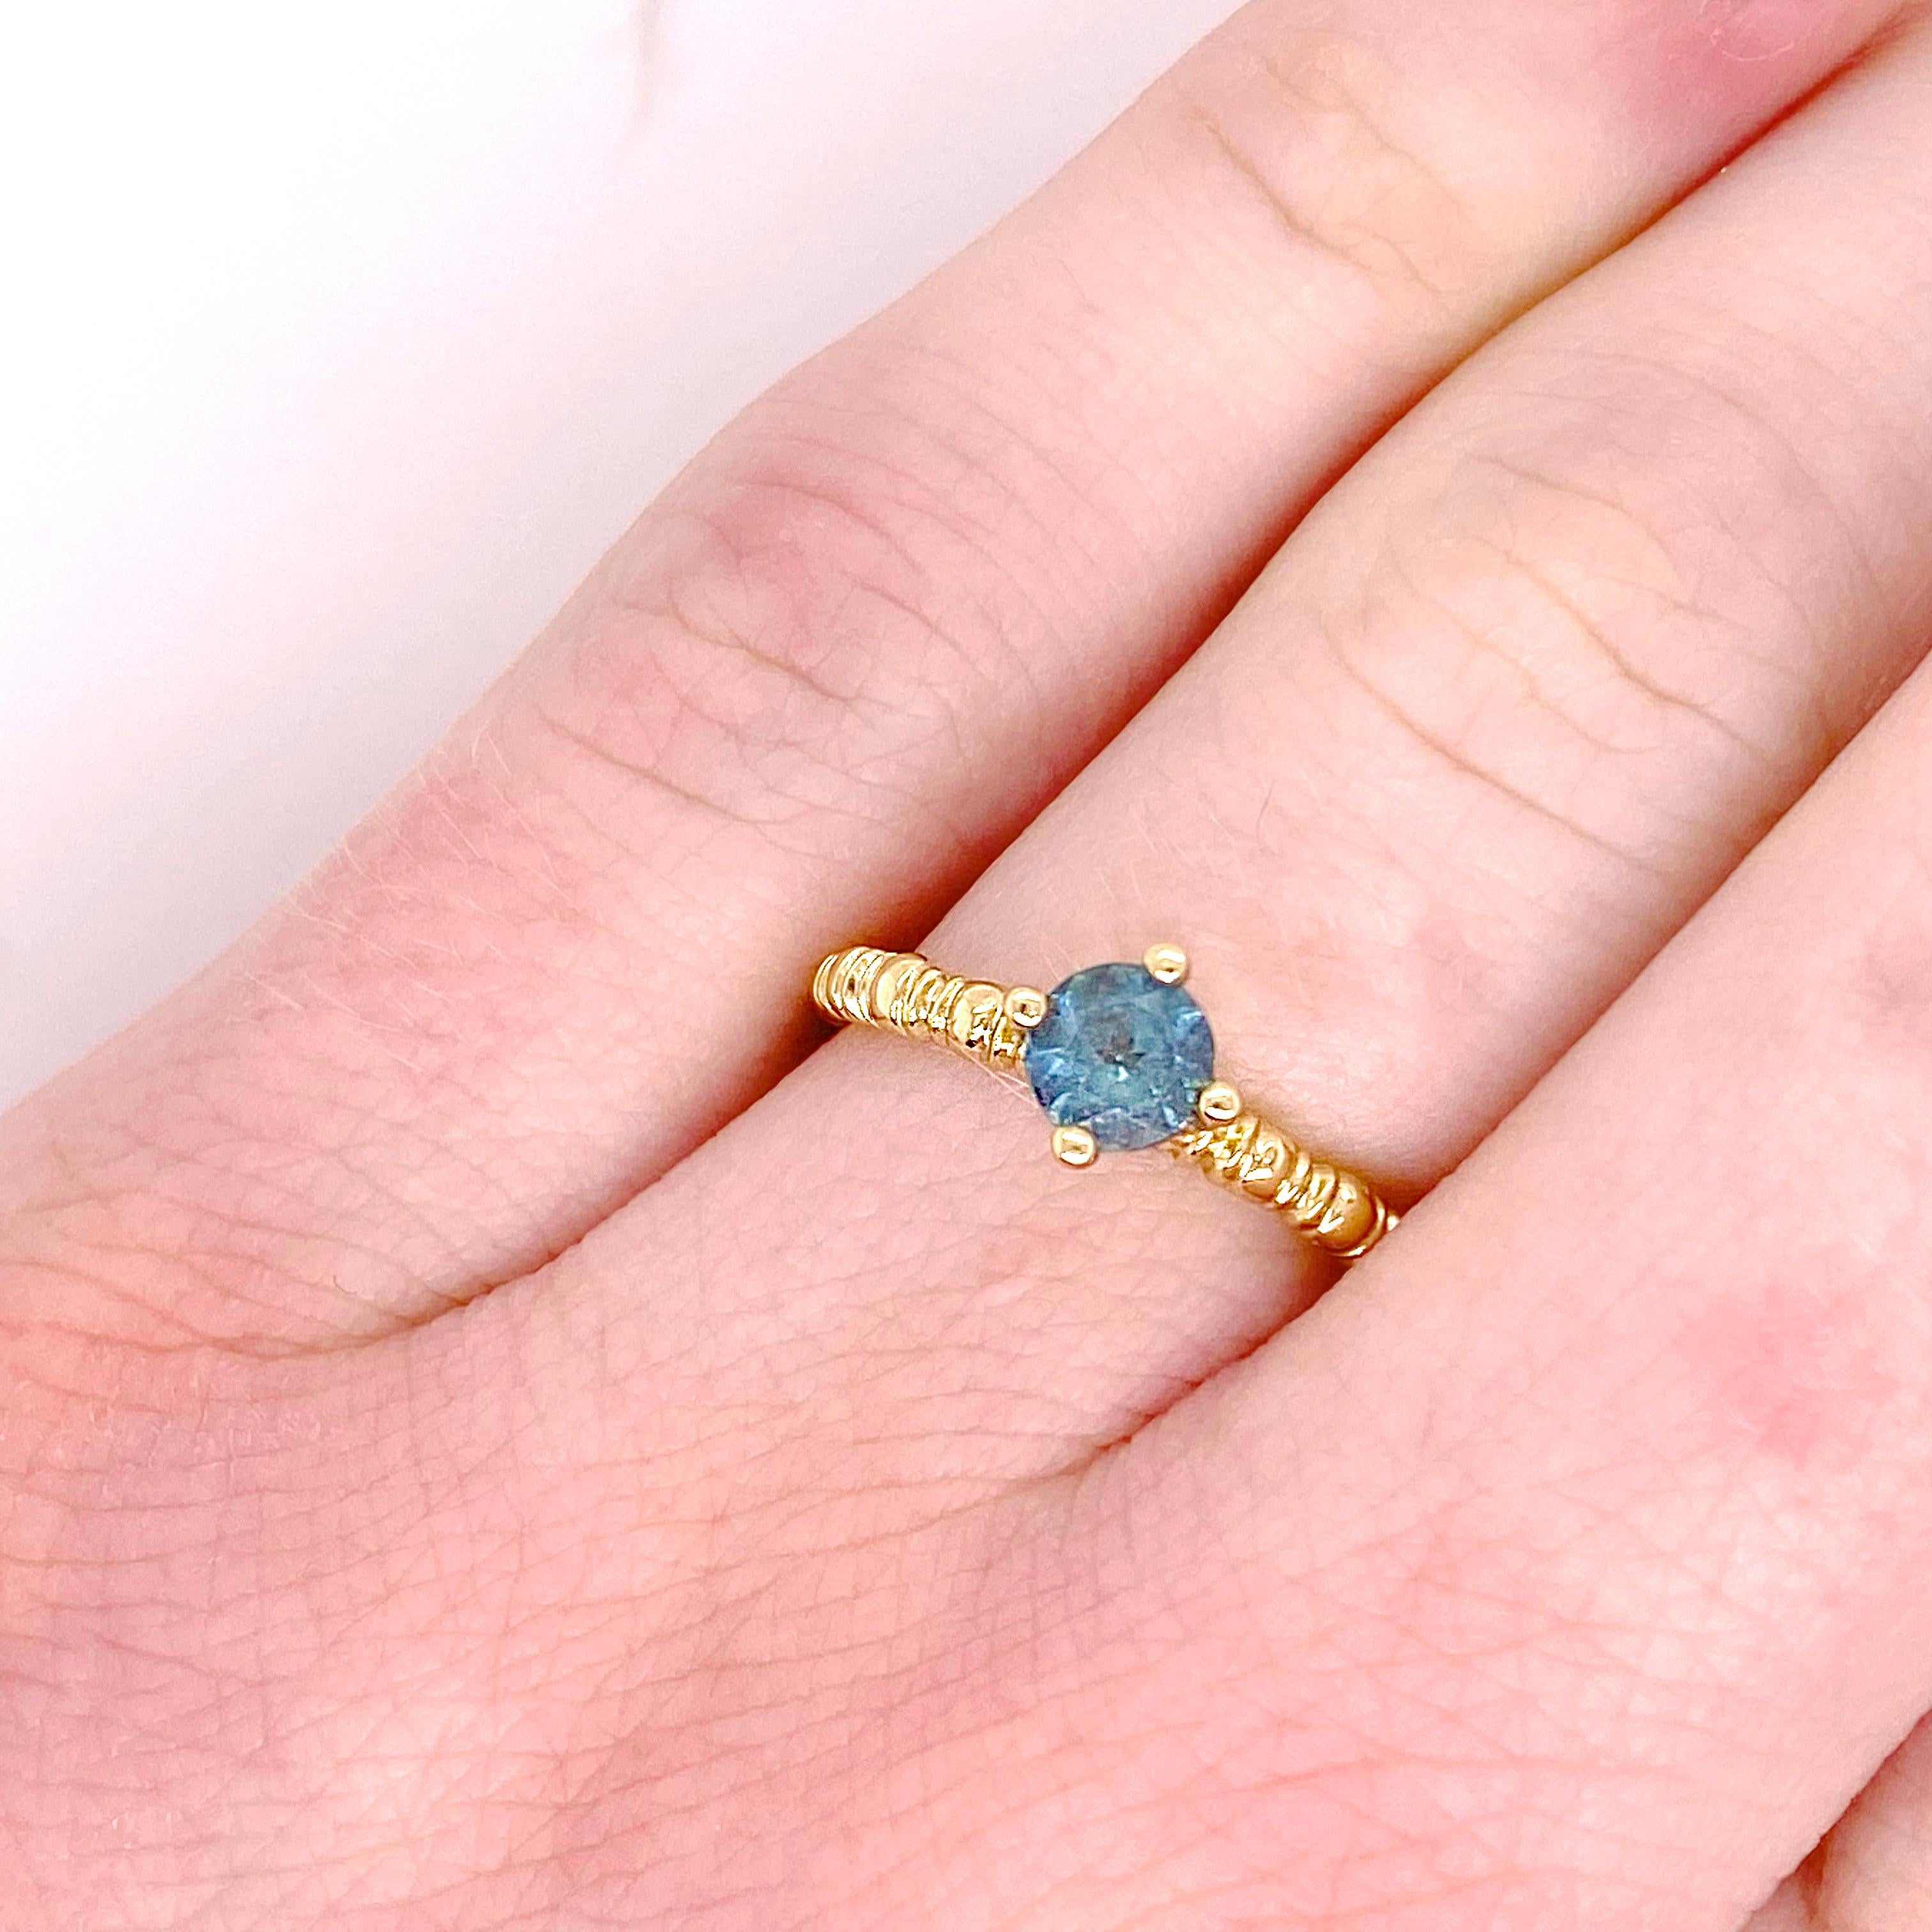 The color combination of the vibrant turquoise blue apatite and the 14 karat yellow gold create such a fun design. Many people have not heard of apatite but its intensity of color makes it very popular with our clients! The textured band gives it